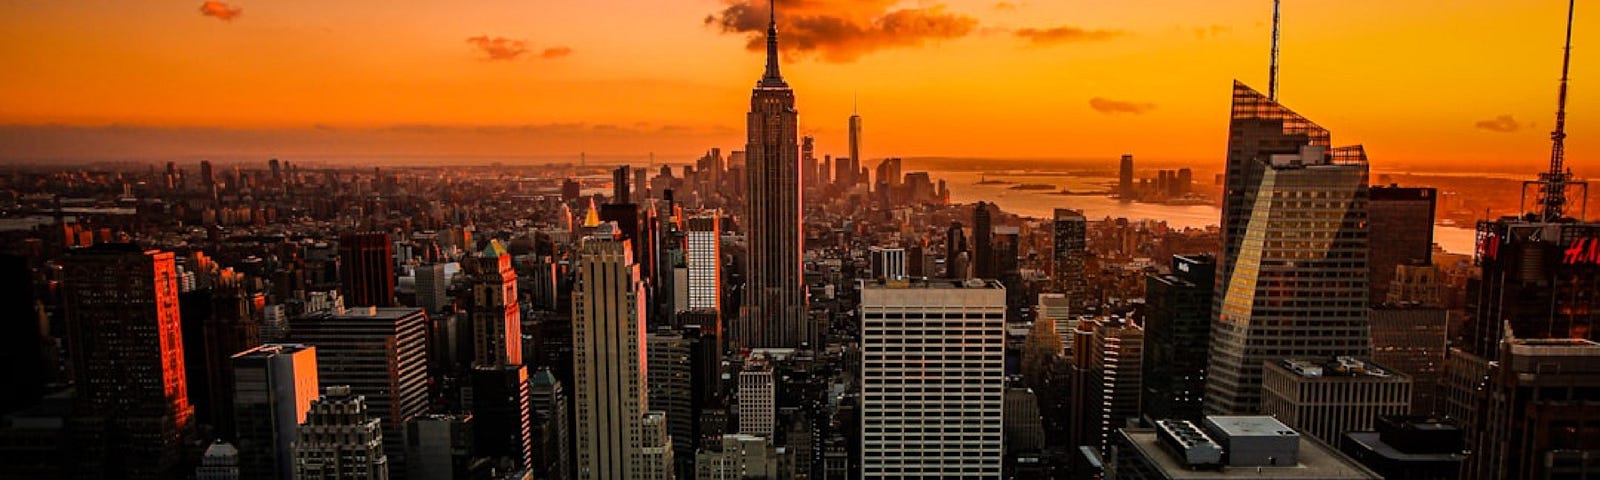 Florian Wehde  took this photo of a sunset over Manhattan from the Rockefeller Center.